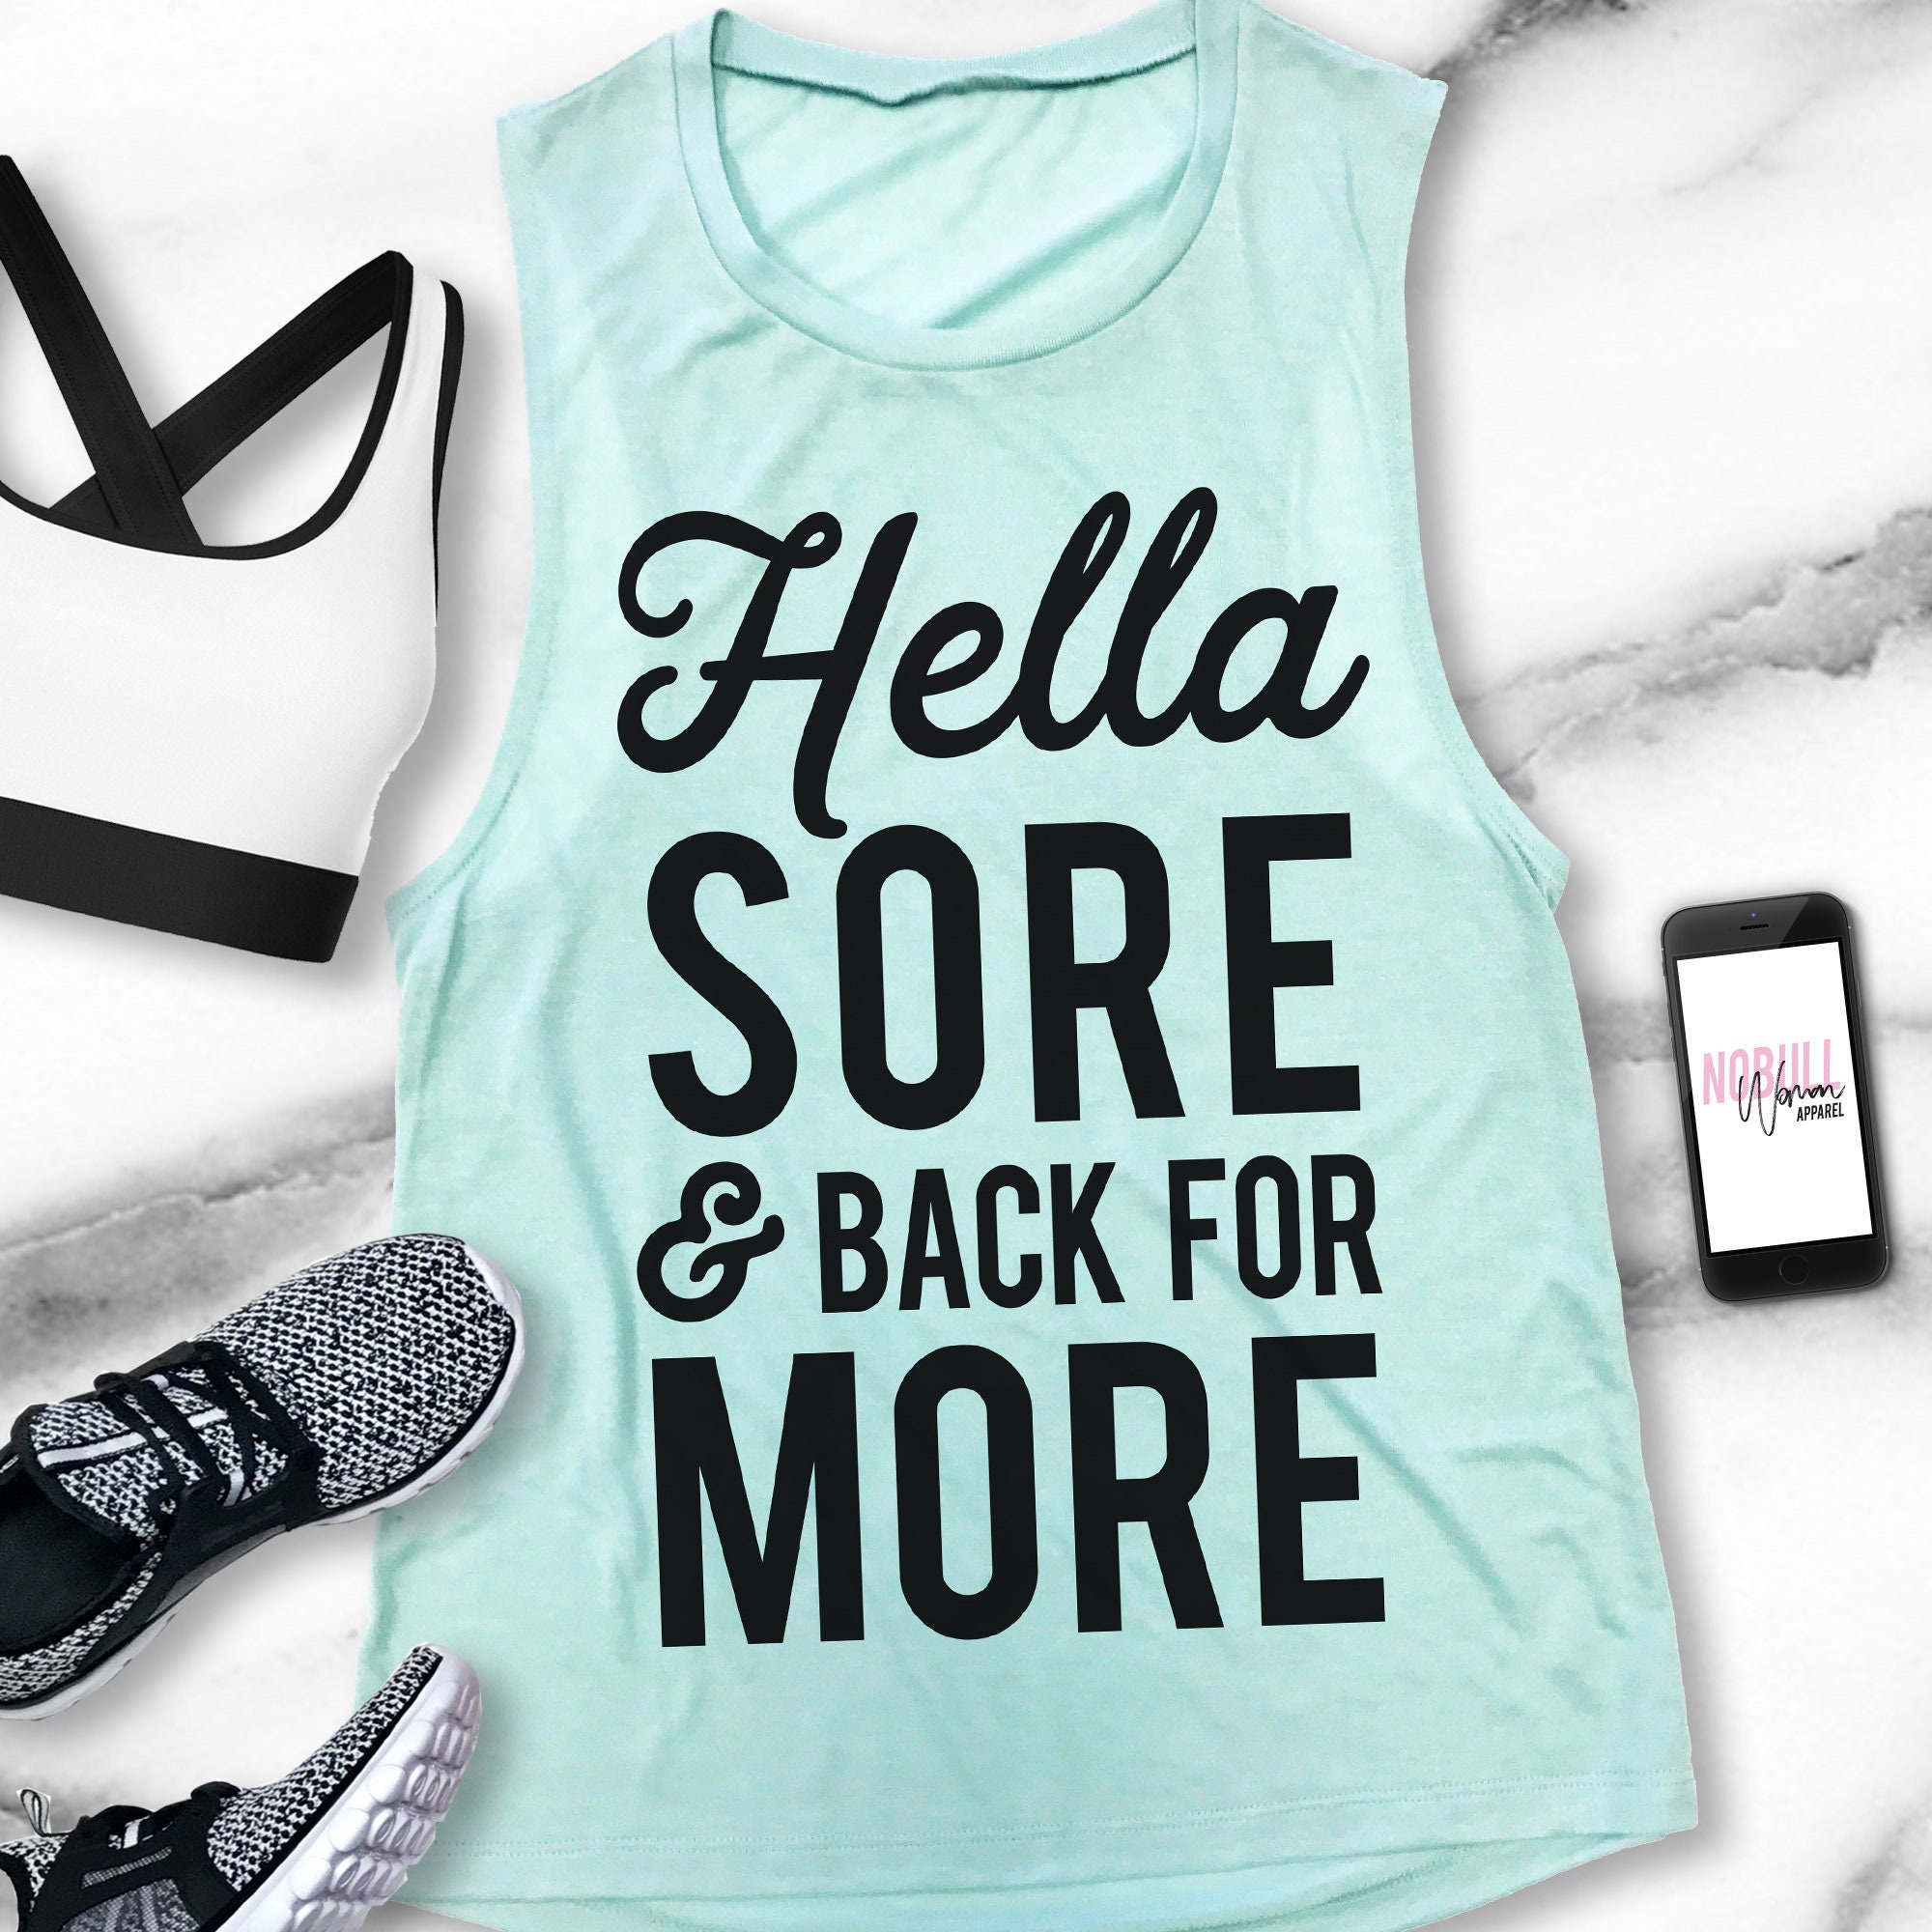 HELLA SORE & BACK for More Workout Tank Top Pick Style, Women's Gyms Tanks,  Workout Tanks, Fitness Shirt, Workout Clothes, Muscle Tanks -  Ireland